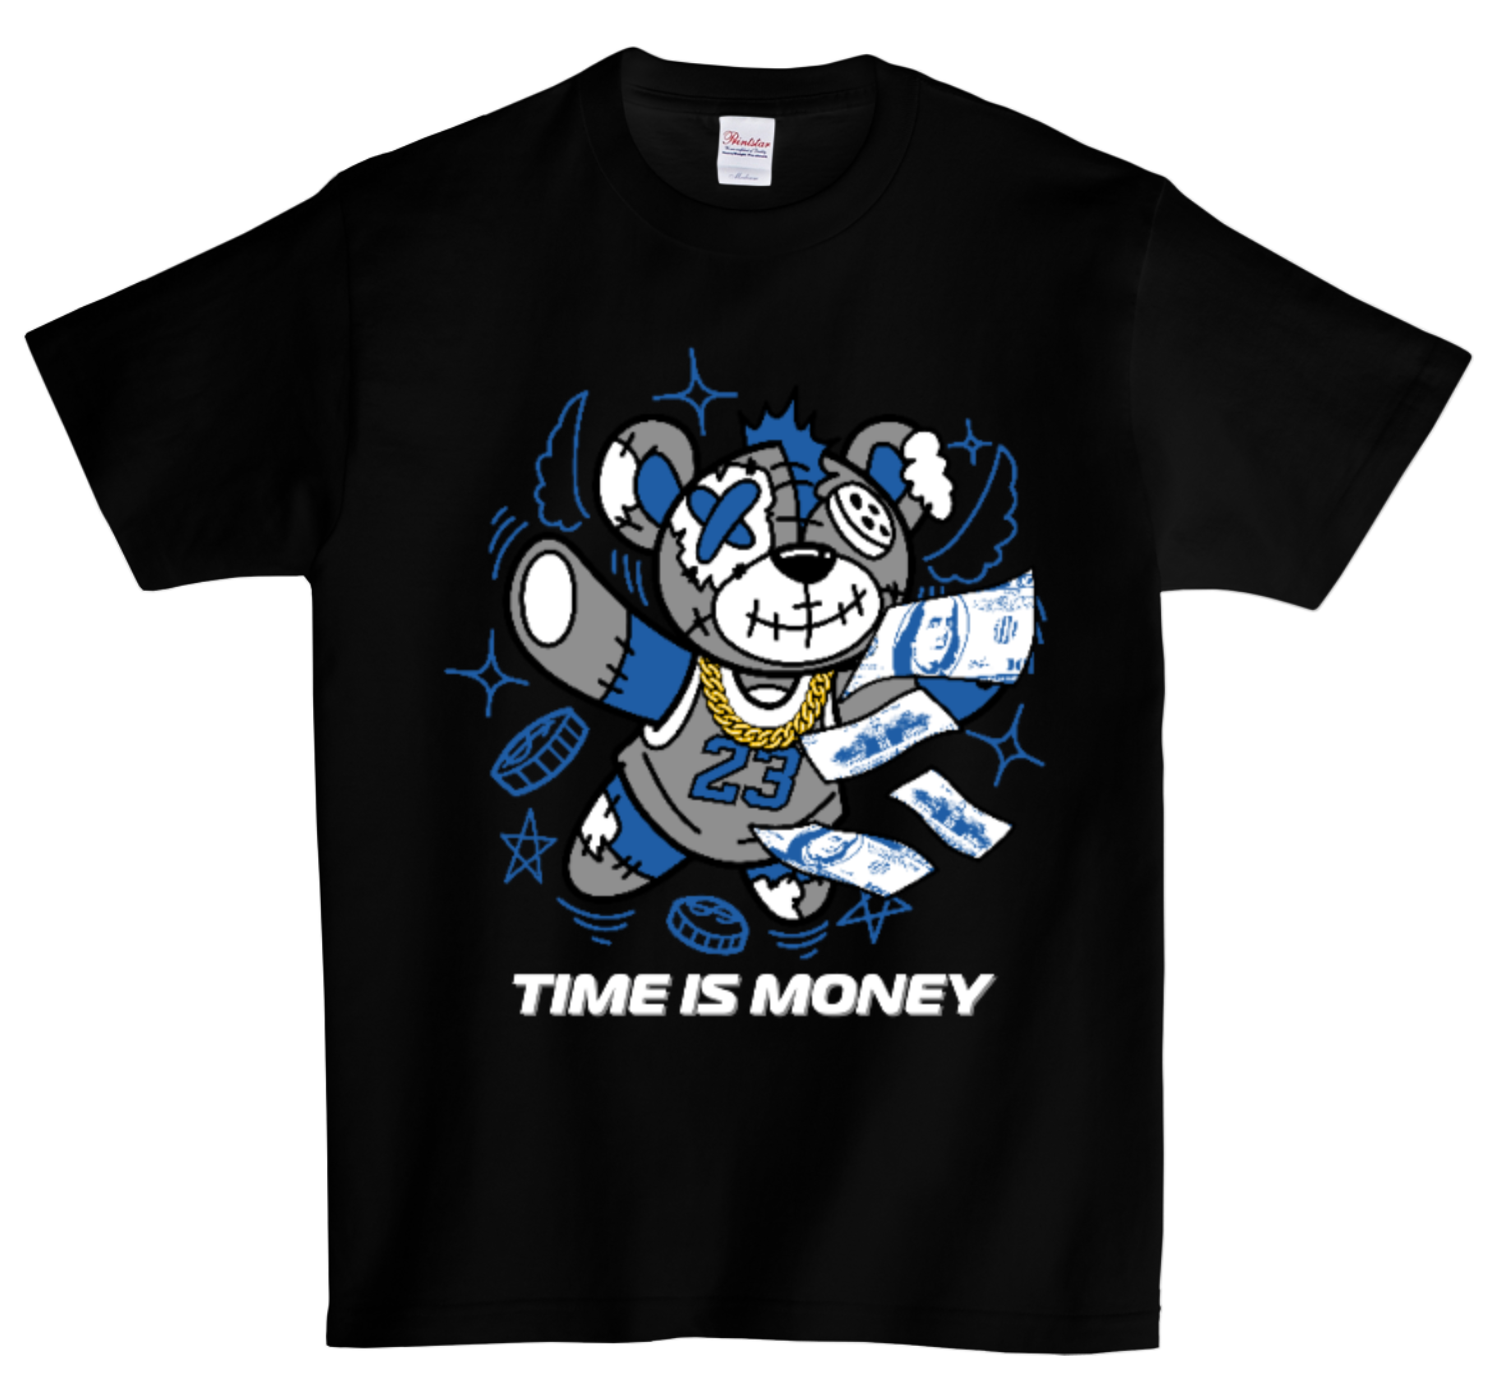 Teddy 23 Time is Money T-Shirts | Grooveman Music